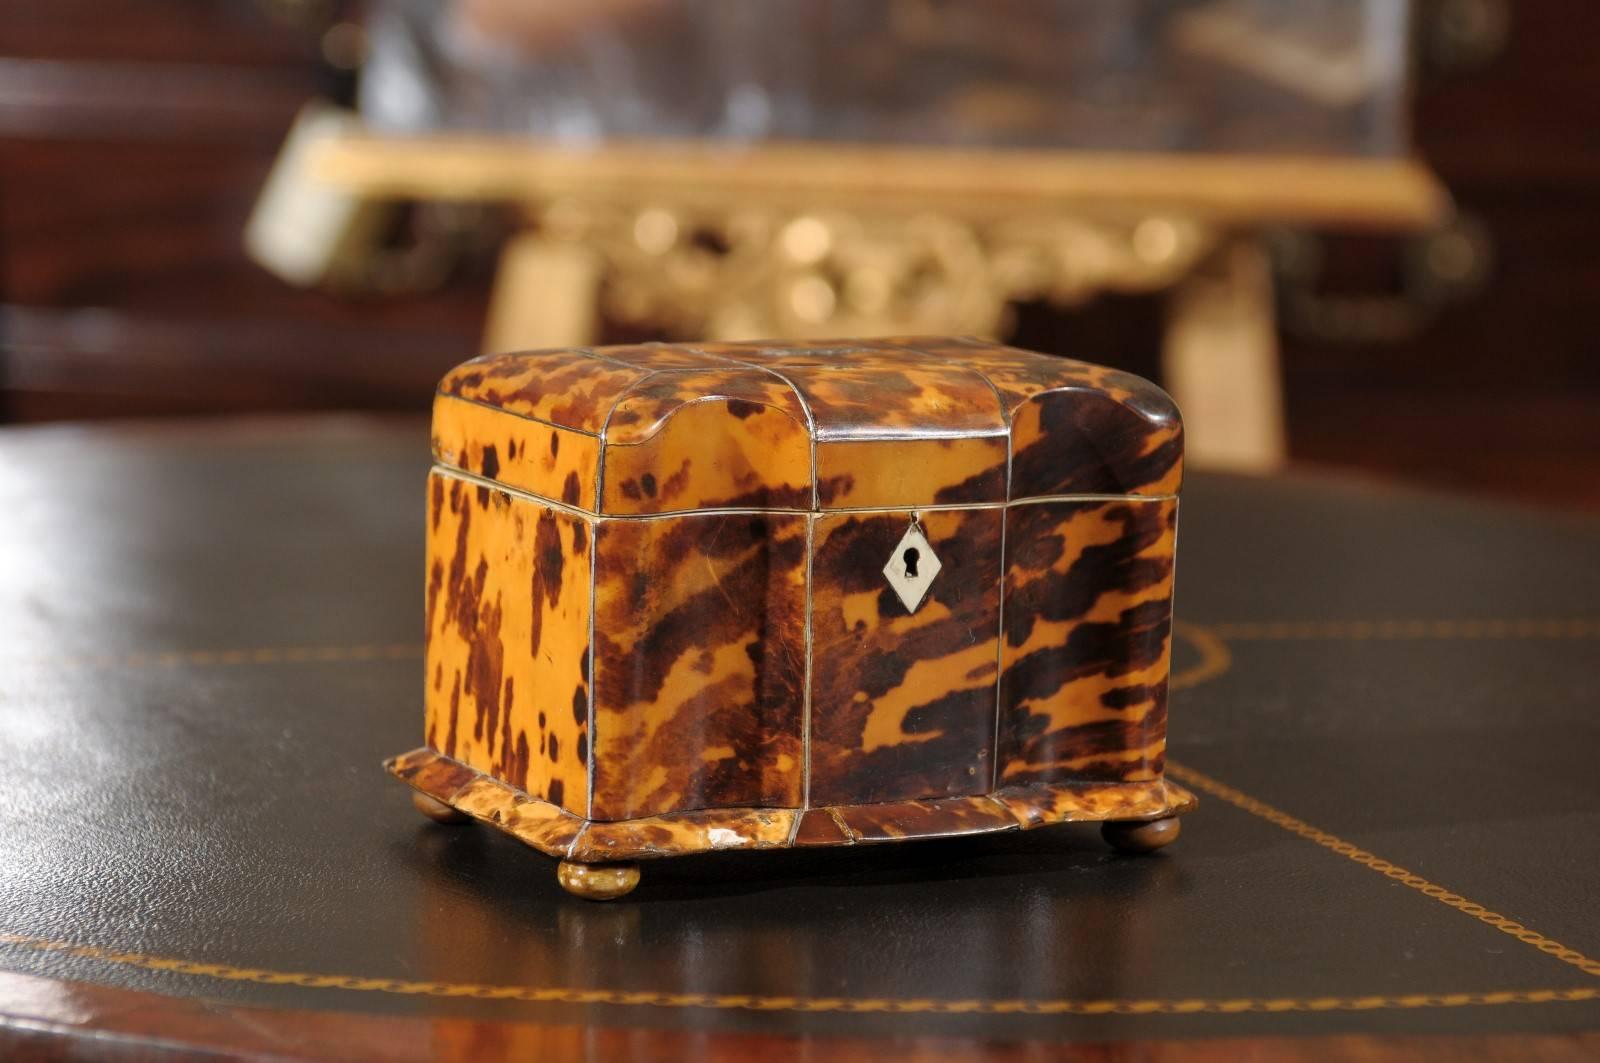 Regency Period Tortoiseshell Tea Caddy with Bun Feet and Two (2) Compartments, England 19th Century